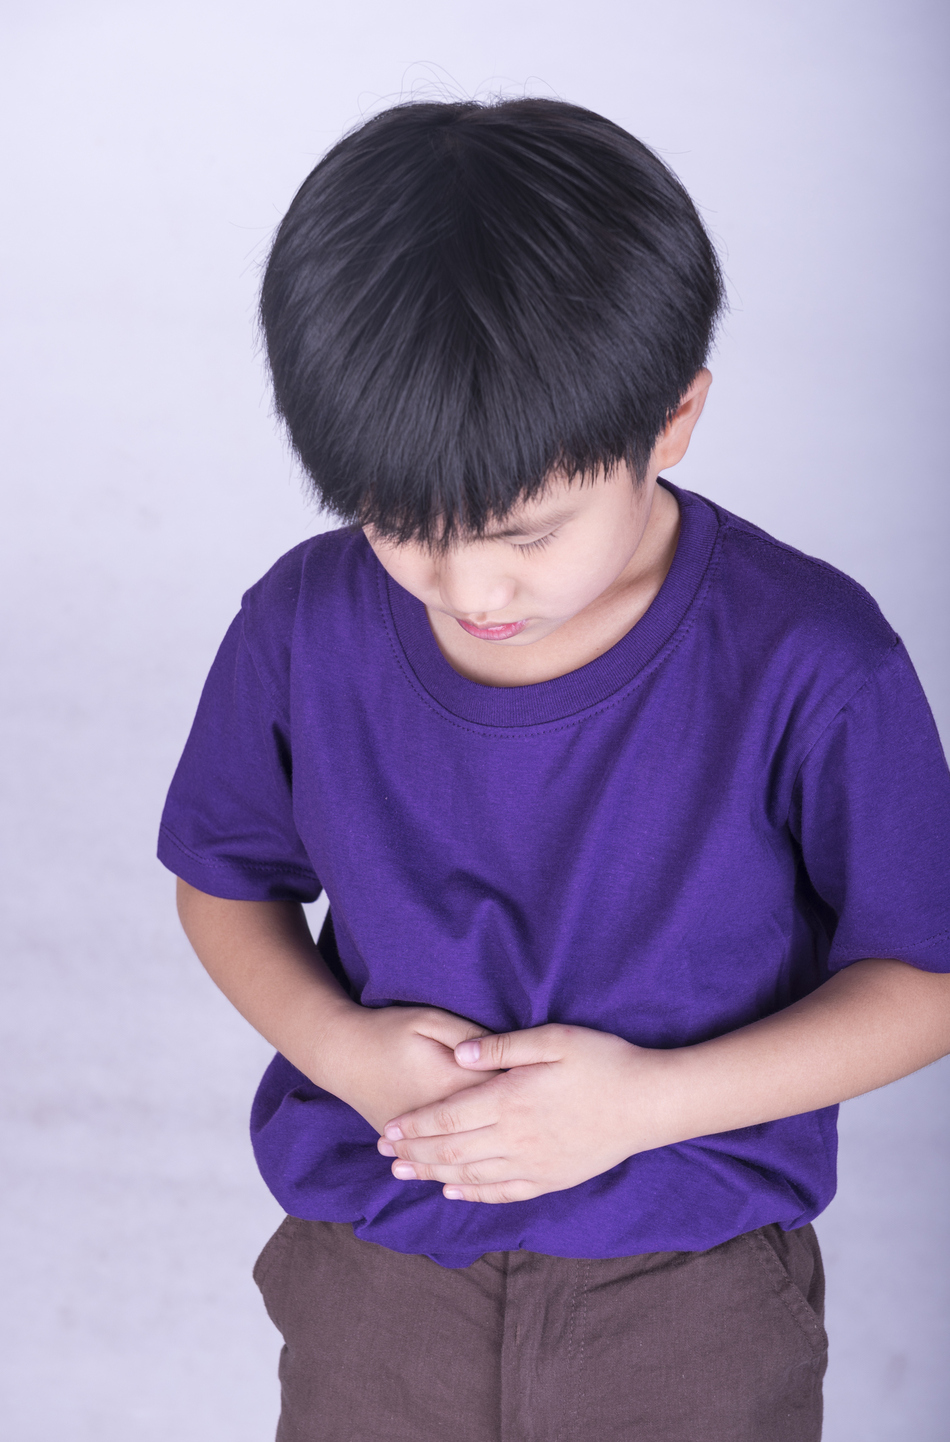 More US Kids Getting Kidney Stones Than Ever Before